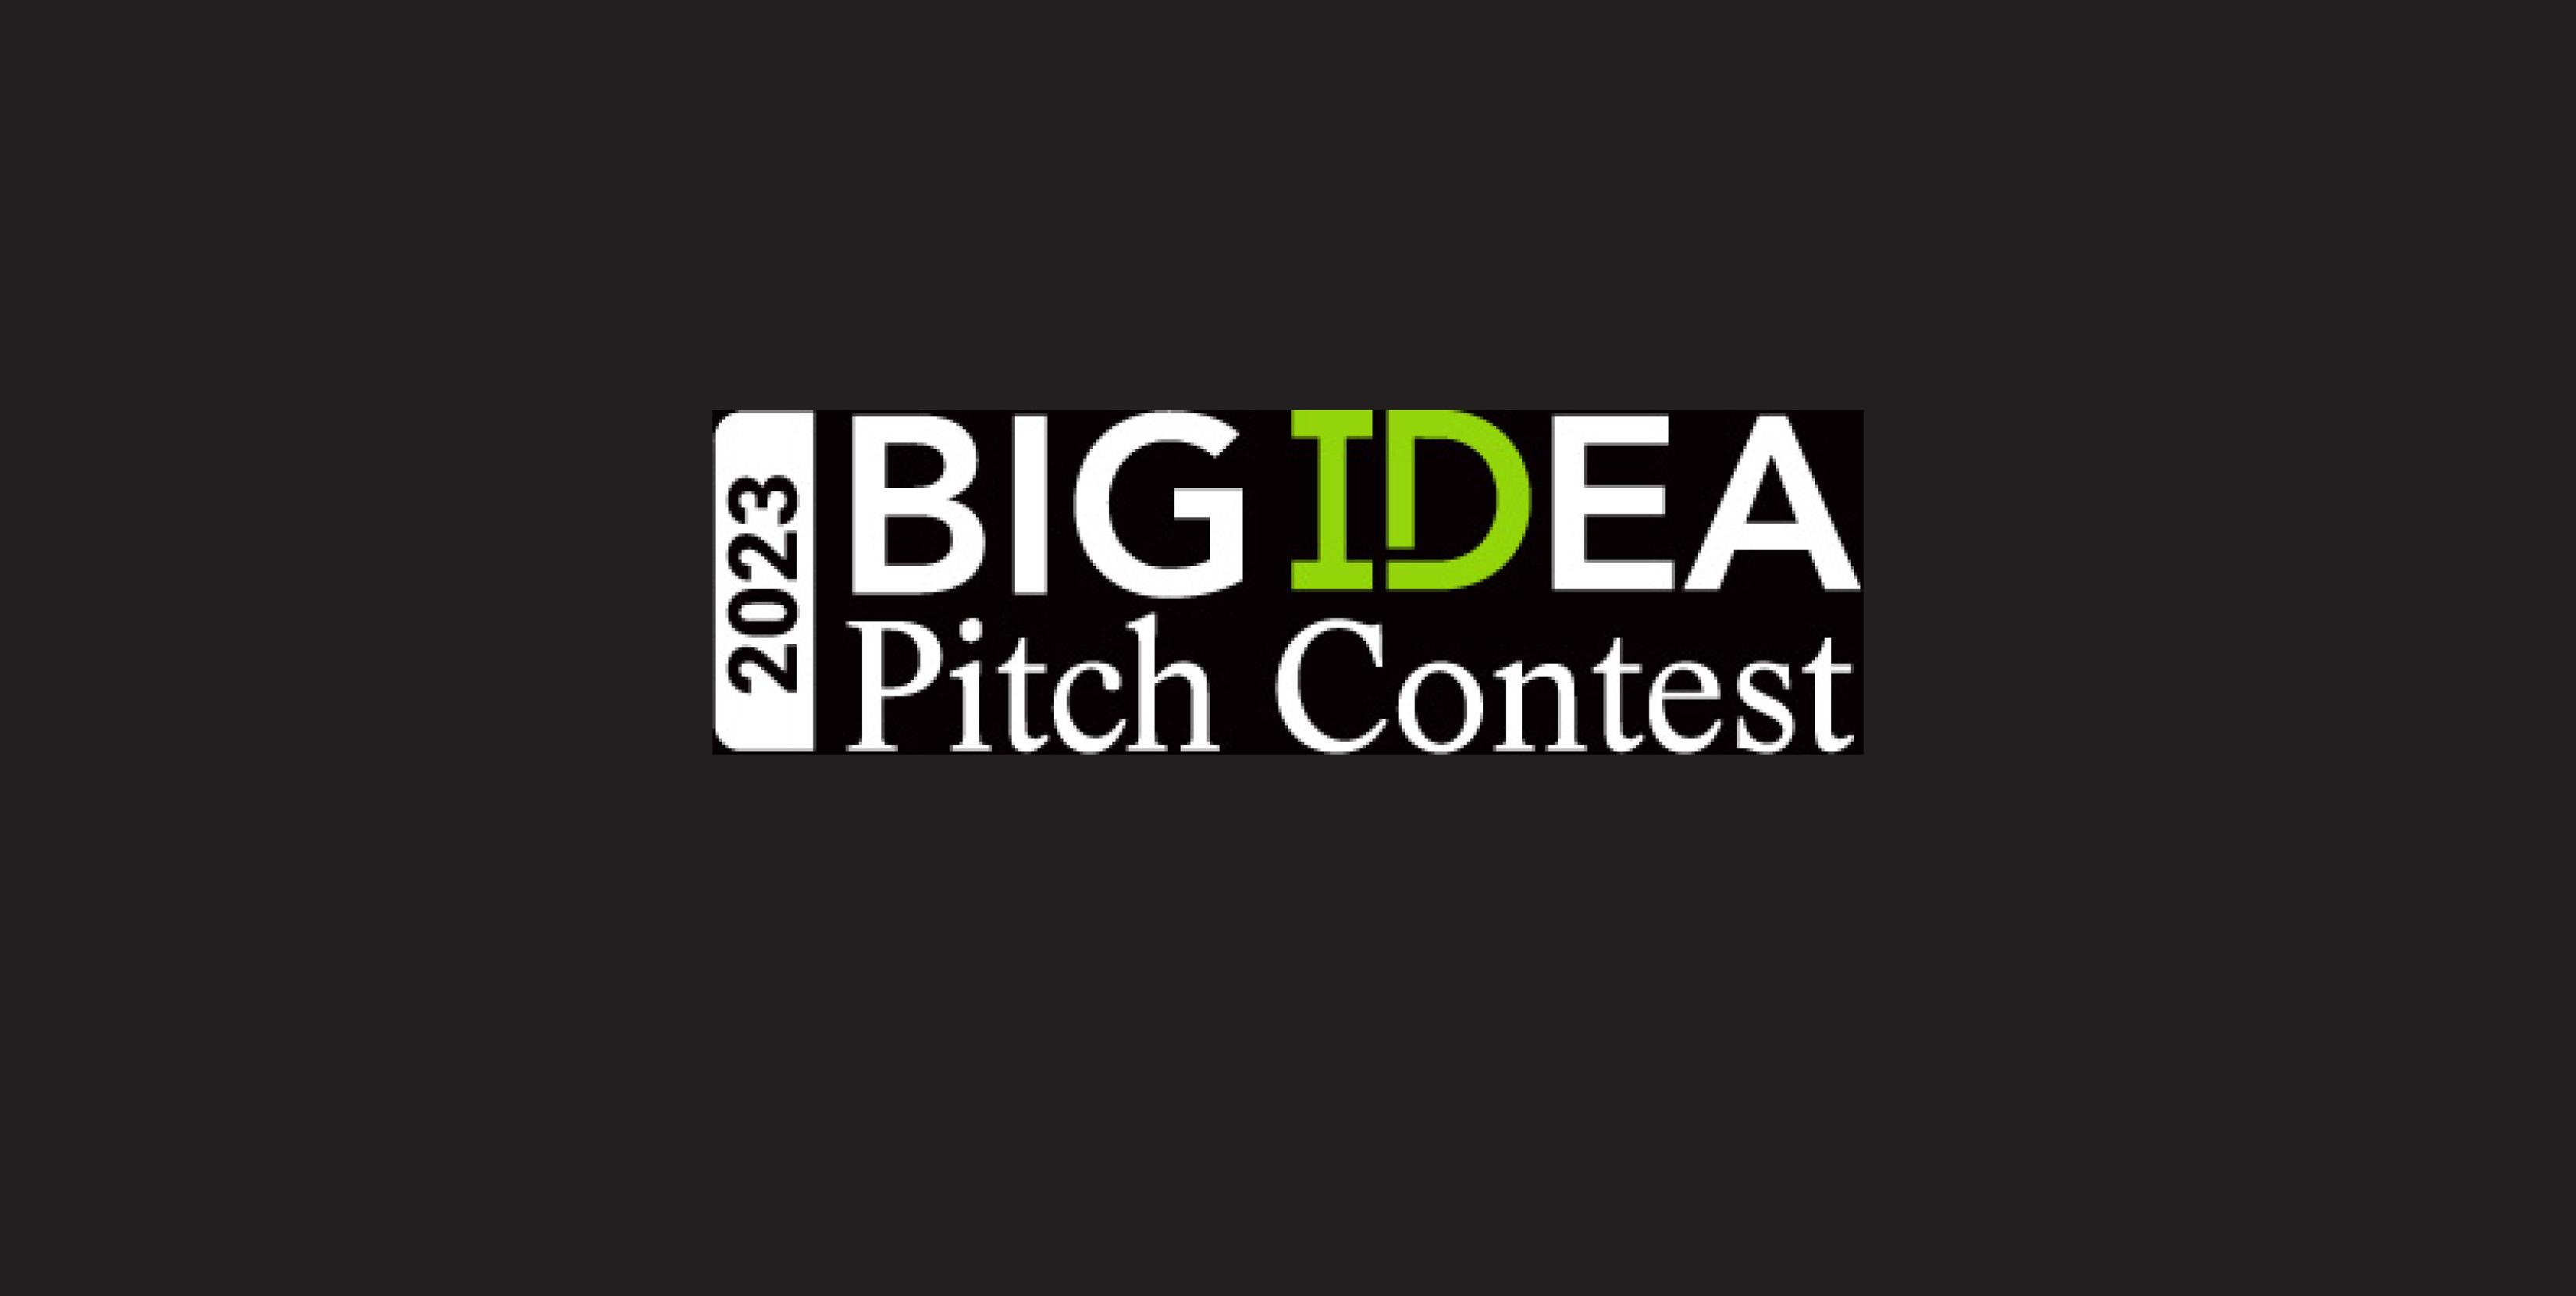 District 88 students invited to participate in BIG IDEA Pitch Contest to share business ideas and win cash prizes